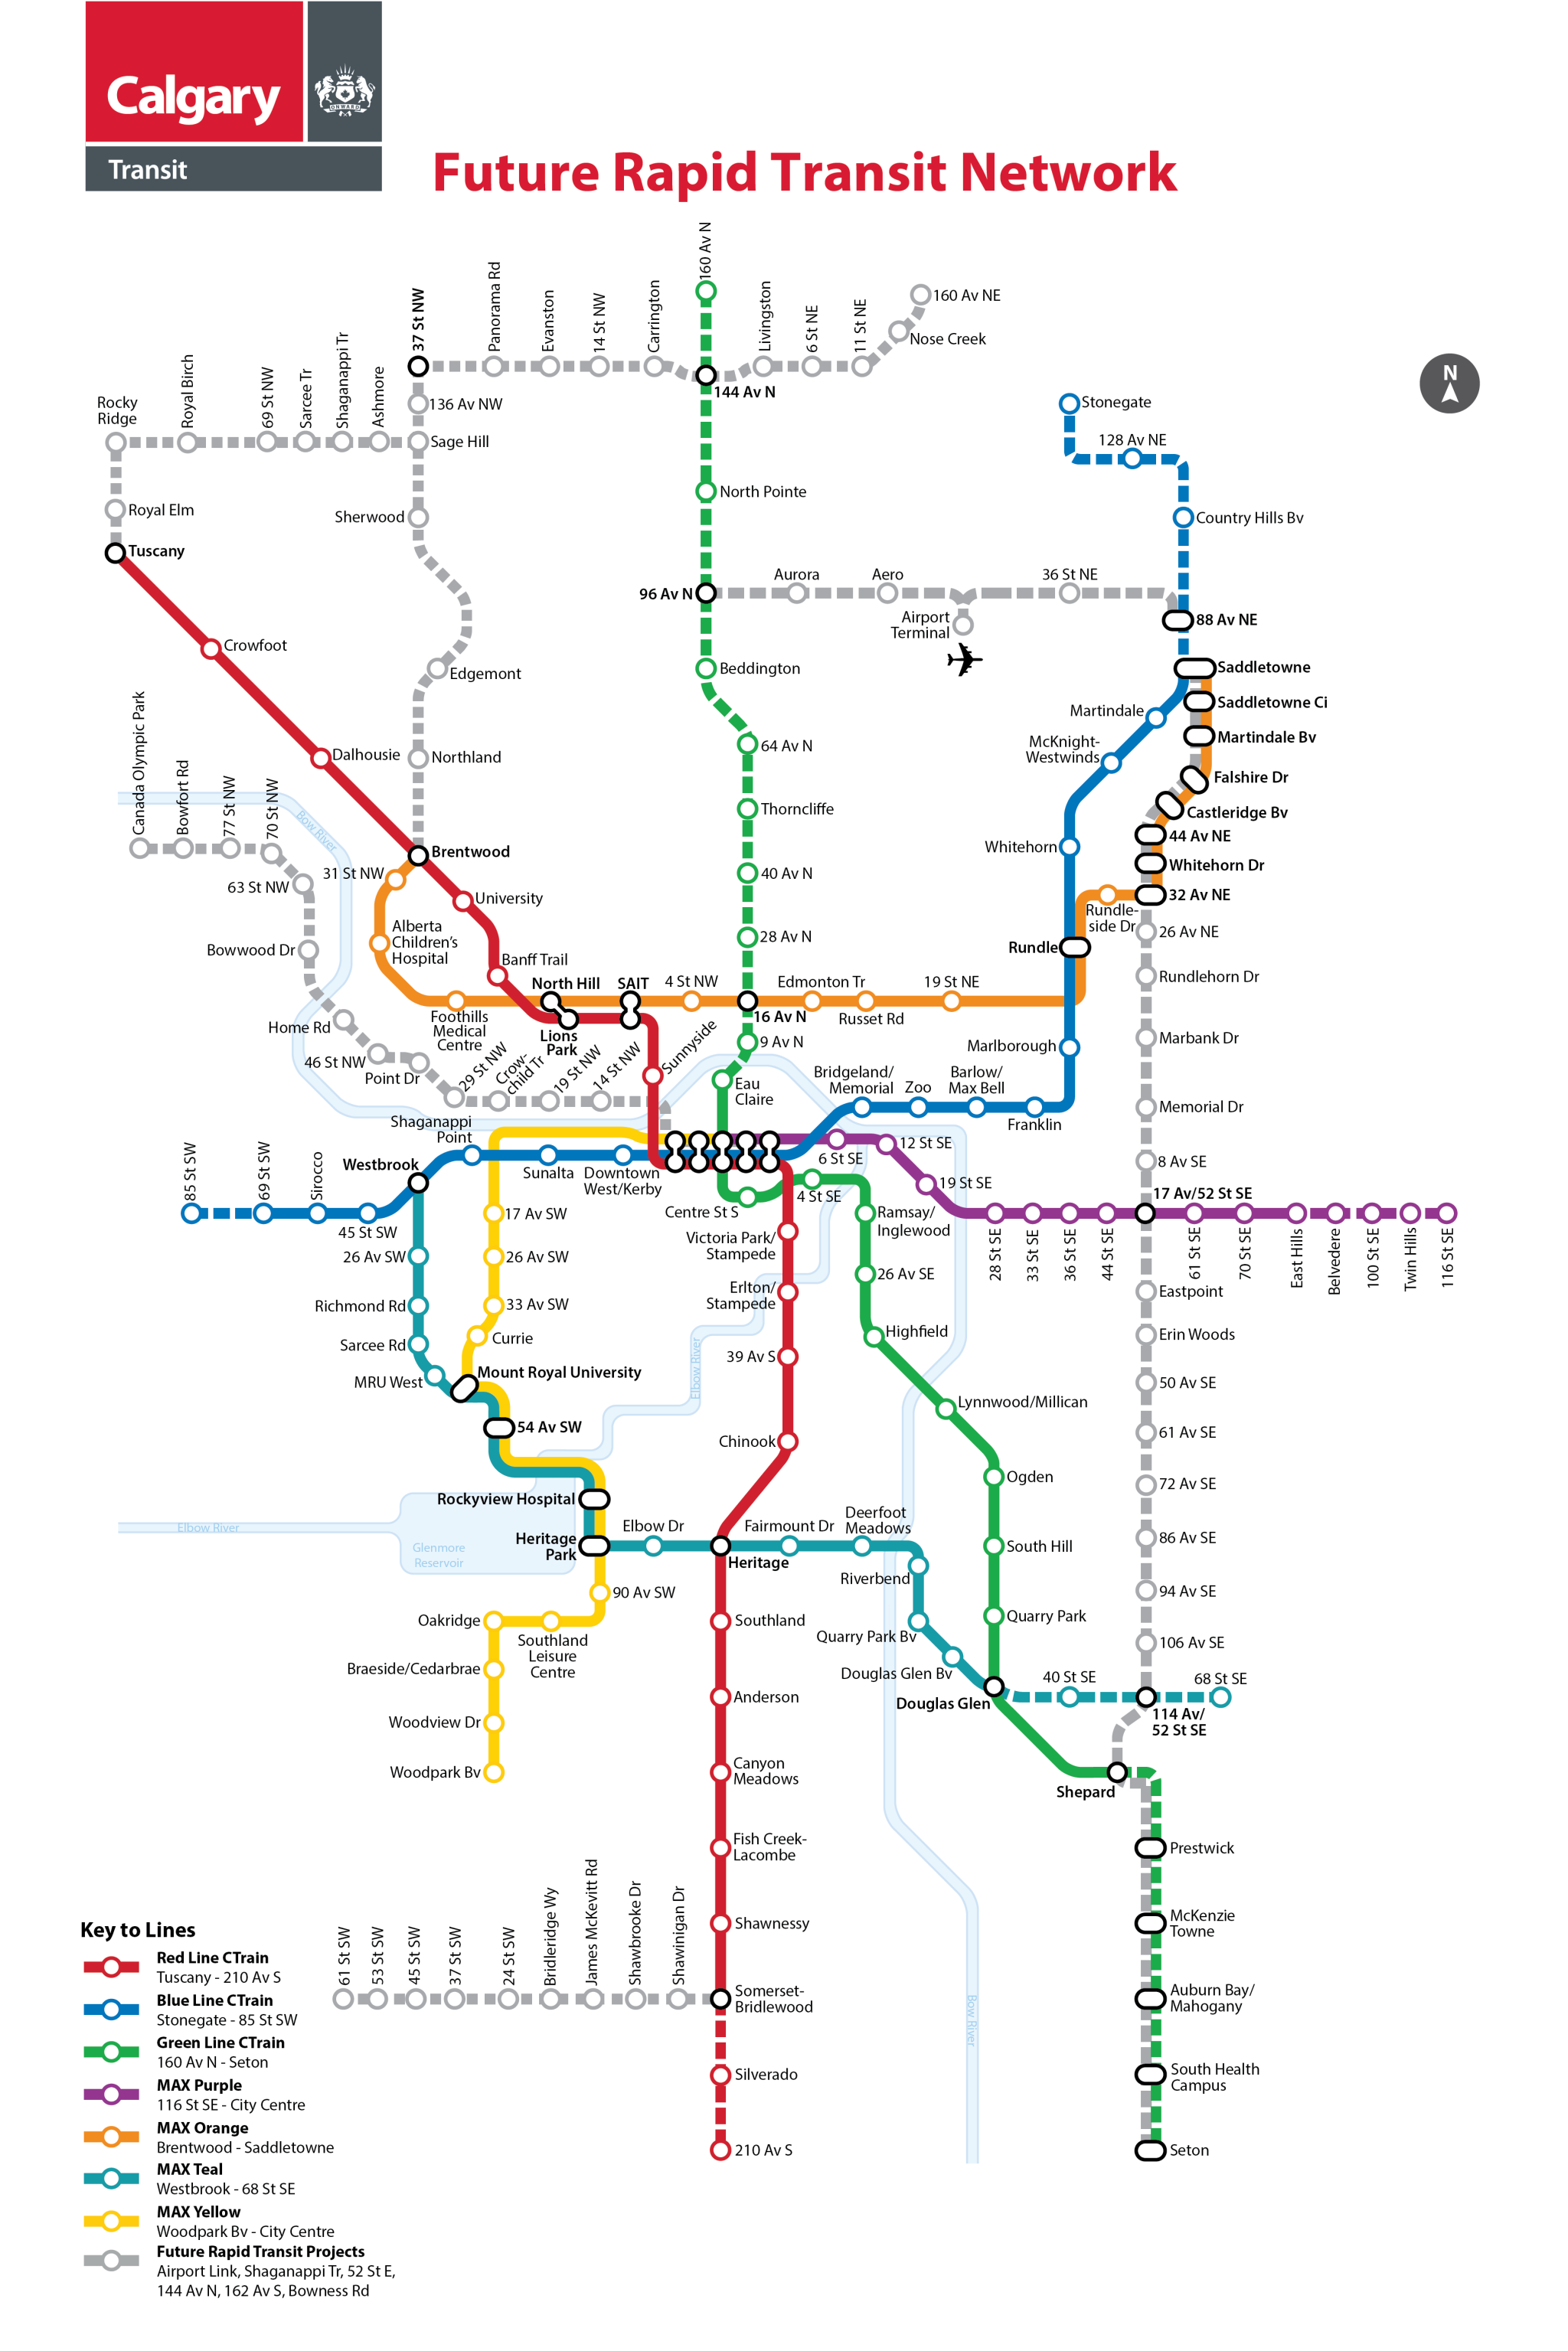 Map of Future Rapid Transit Network with Light Rail Transit, Bus Rapid Transit and MAX Bus Rapid Transit lines.